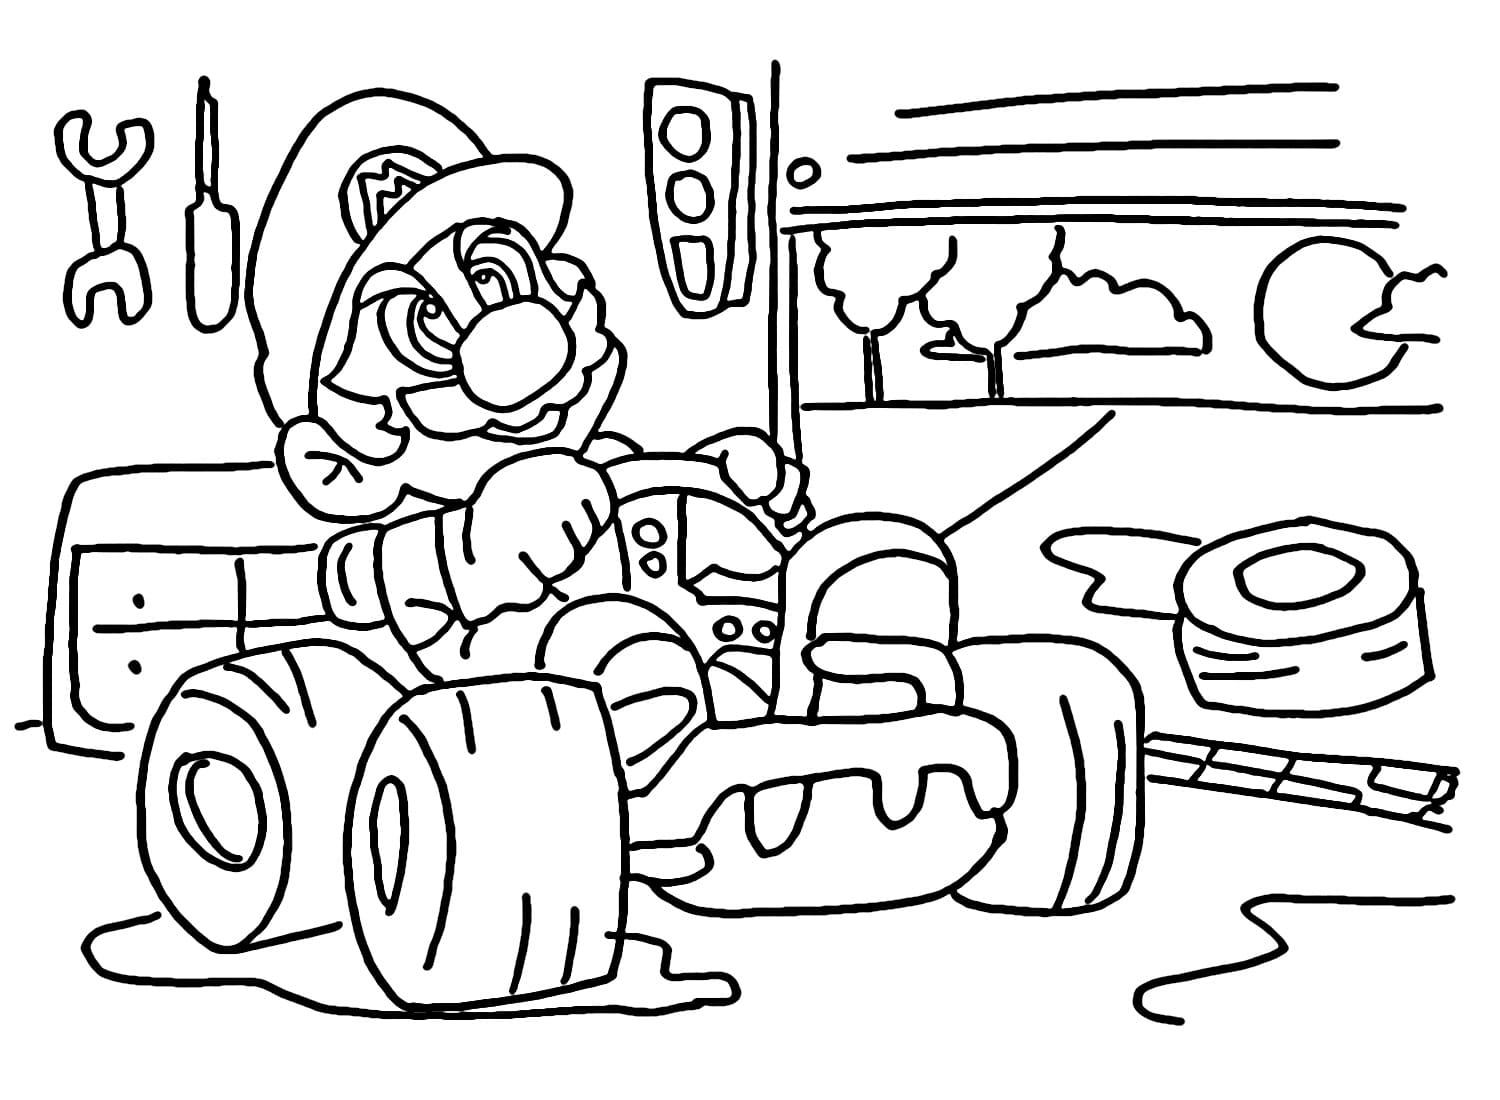 mario kart coloring pages toad